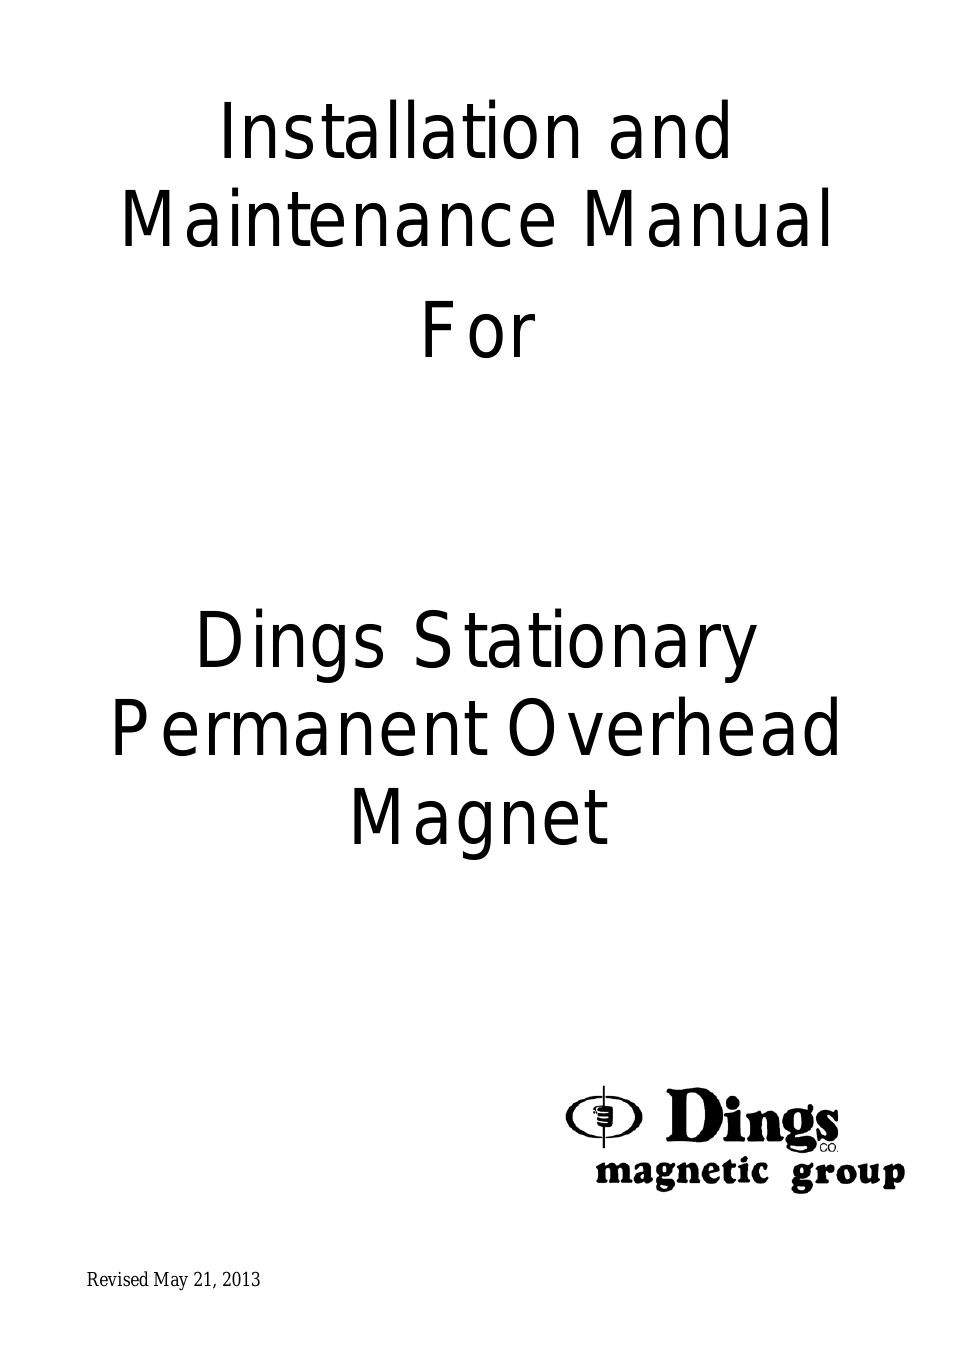 Stationary Permanent Overhead Magnet